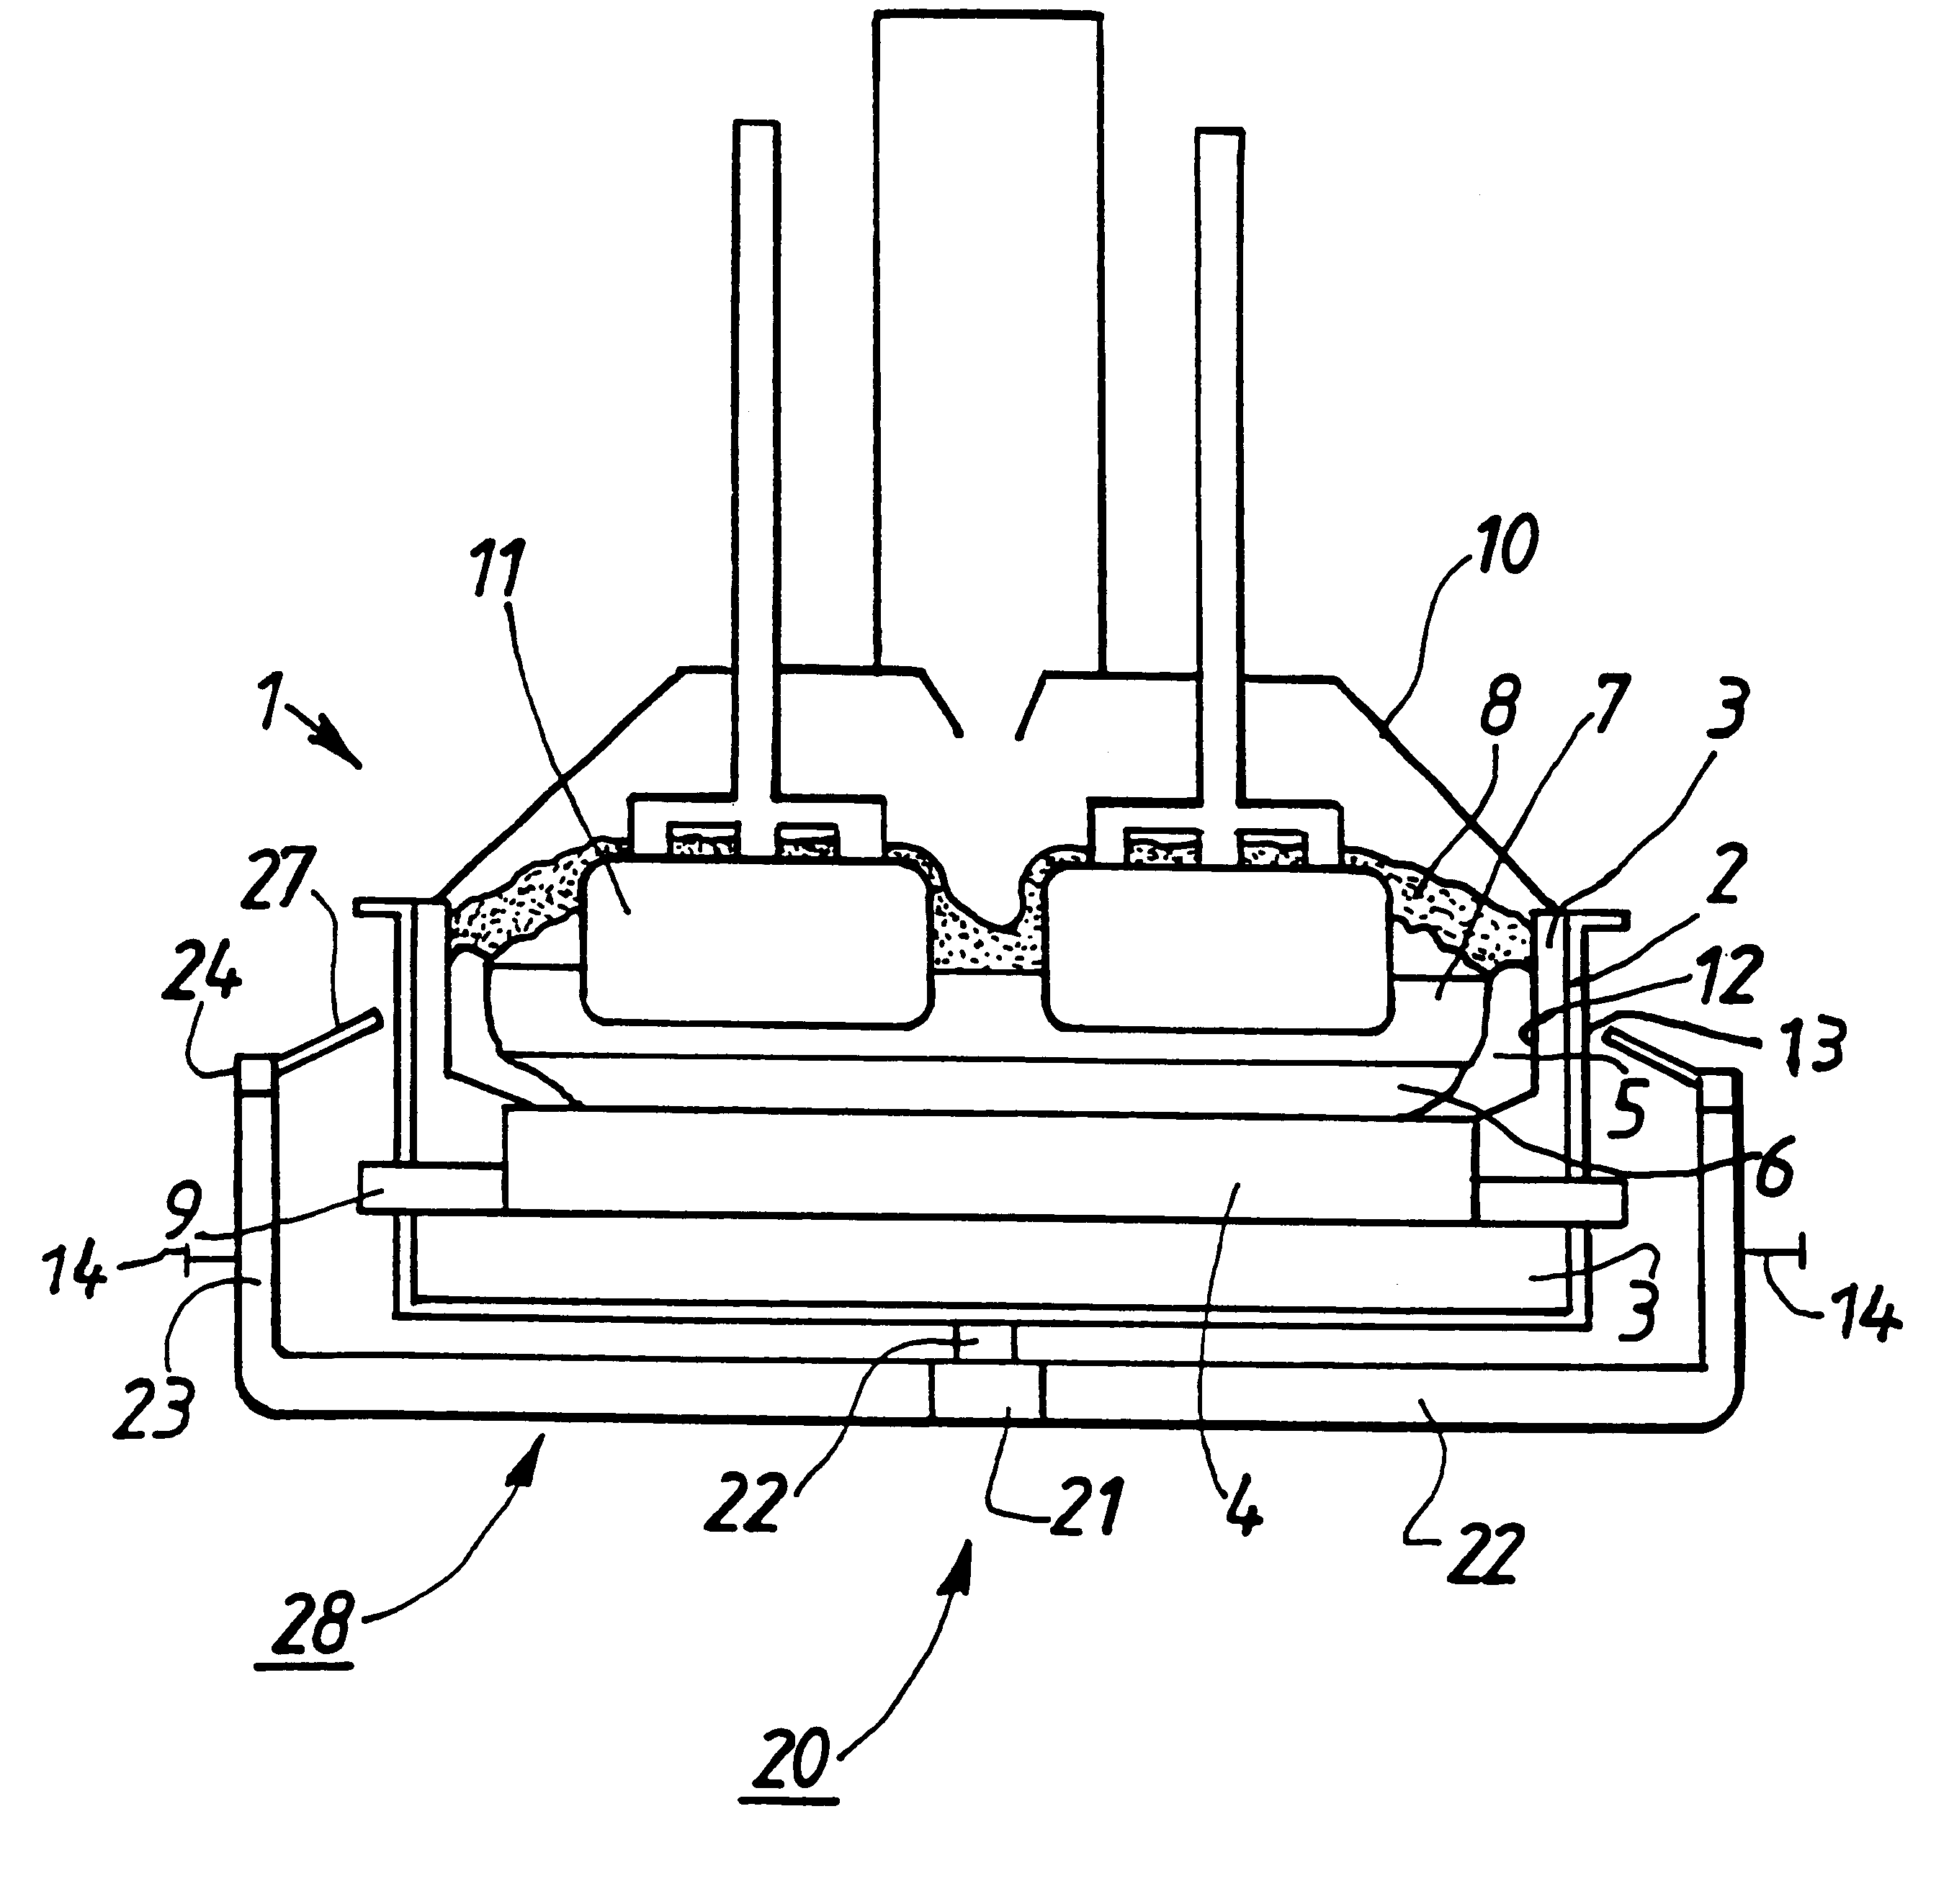 Electrolytic pot for production of aluminum using the Hall-Héroult process comprising cooling means